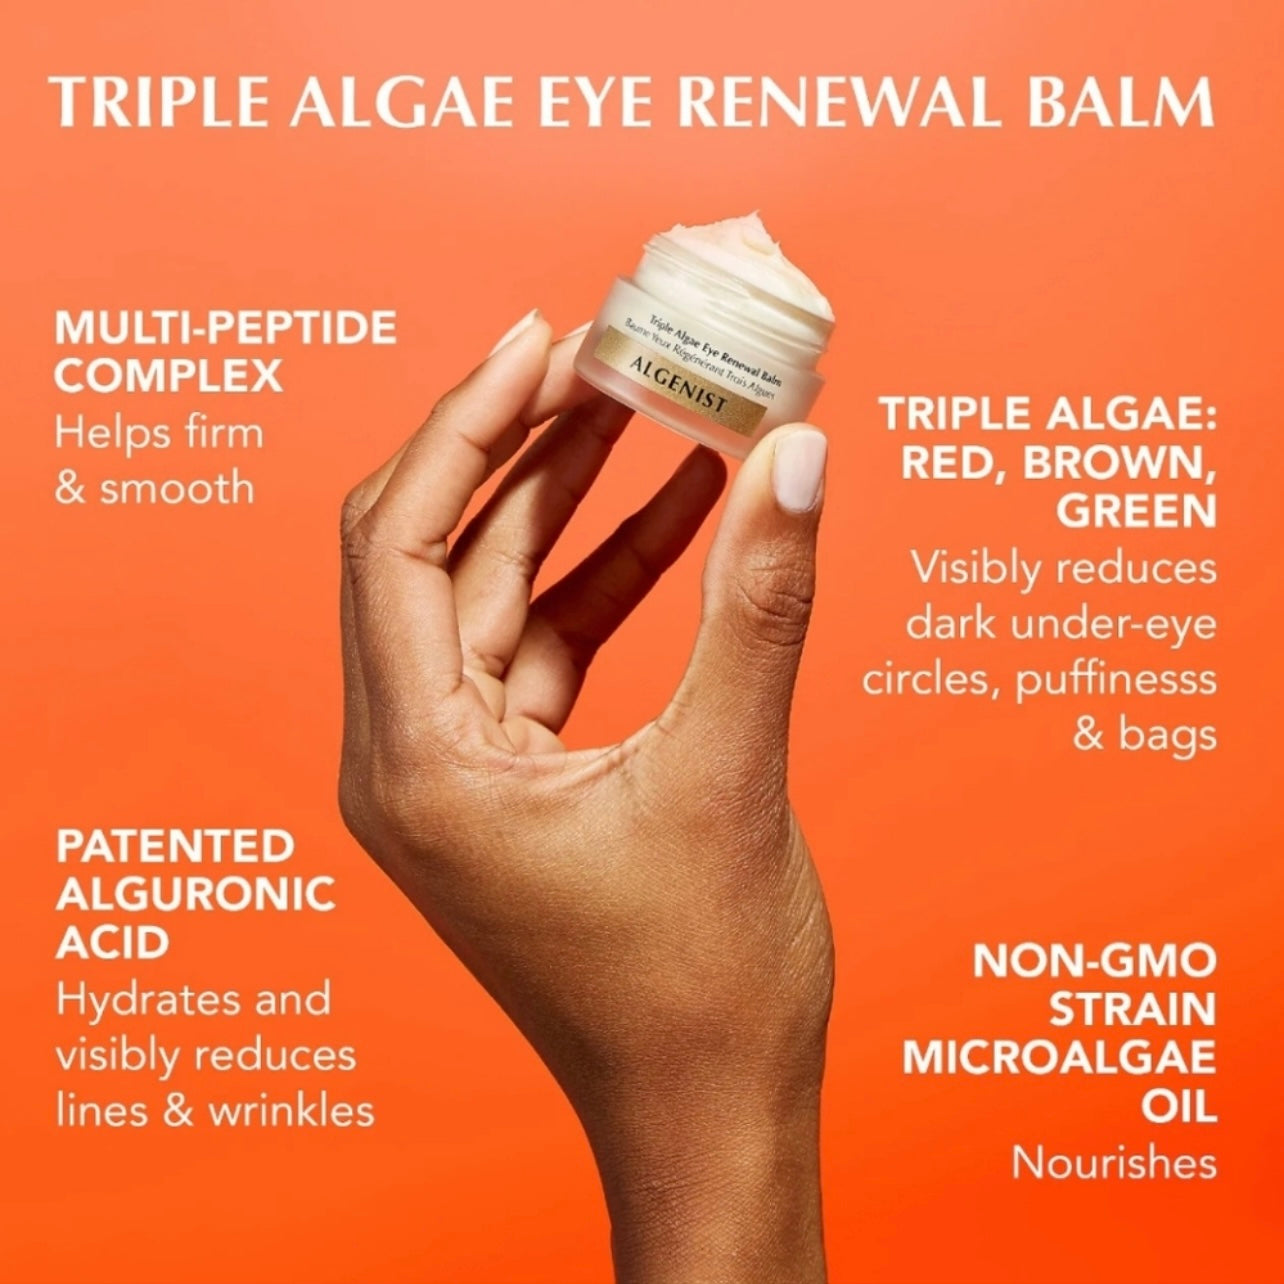 Algenist triple algae eye renewal balm with multi peptide complex and formulated with Alguronic acid in the full size 15ml size. currently sold at Facetreasures Boutique at Facetreasures.com All items ship out the same day you order with a free full size gift